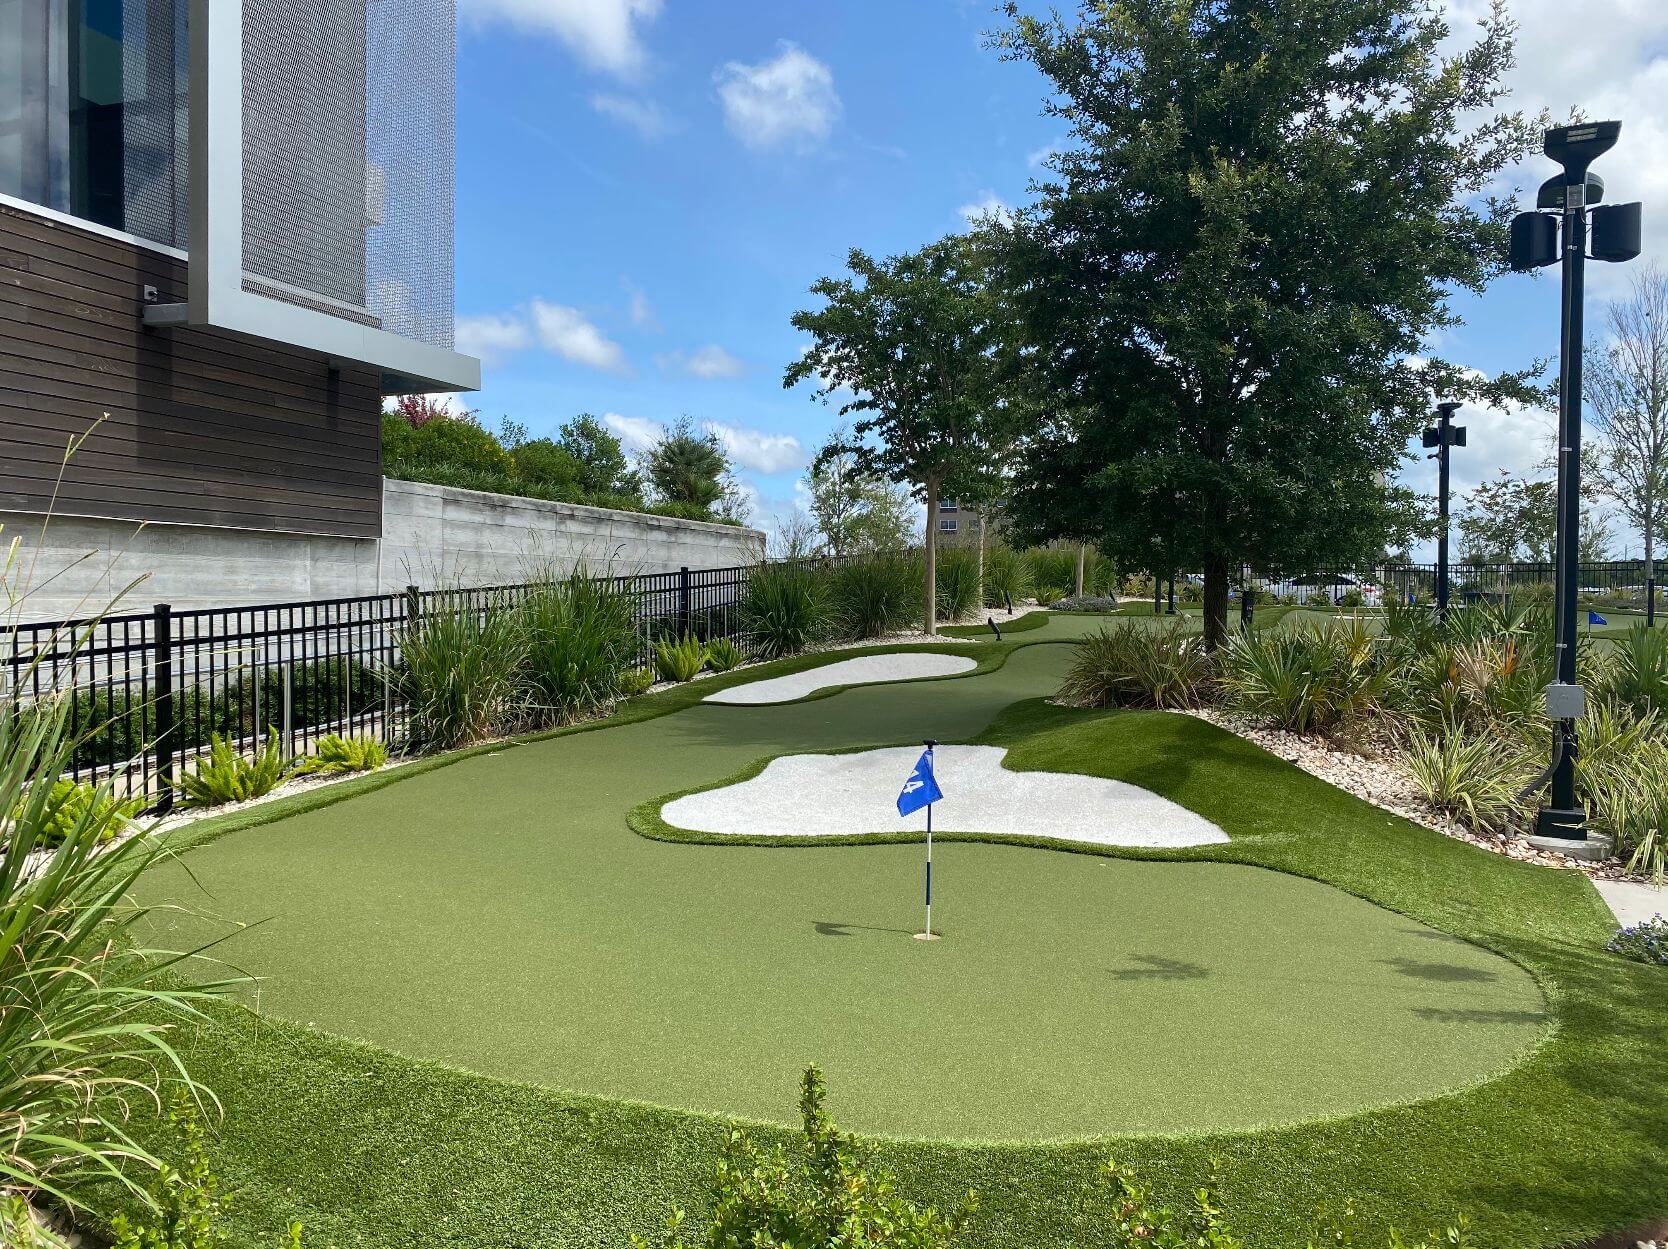 4-synlawn-commercial-putting-green